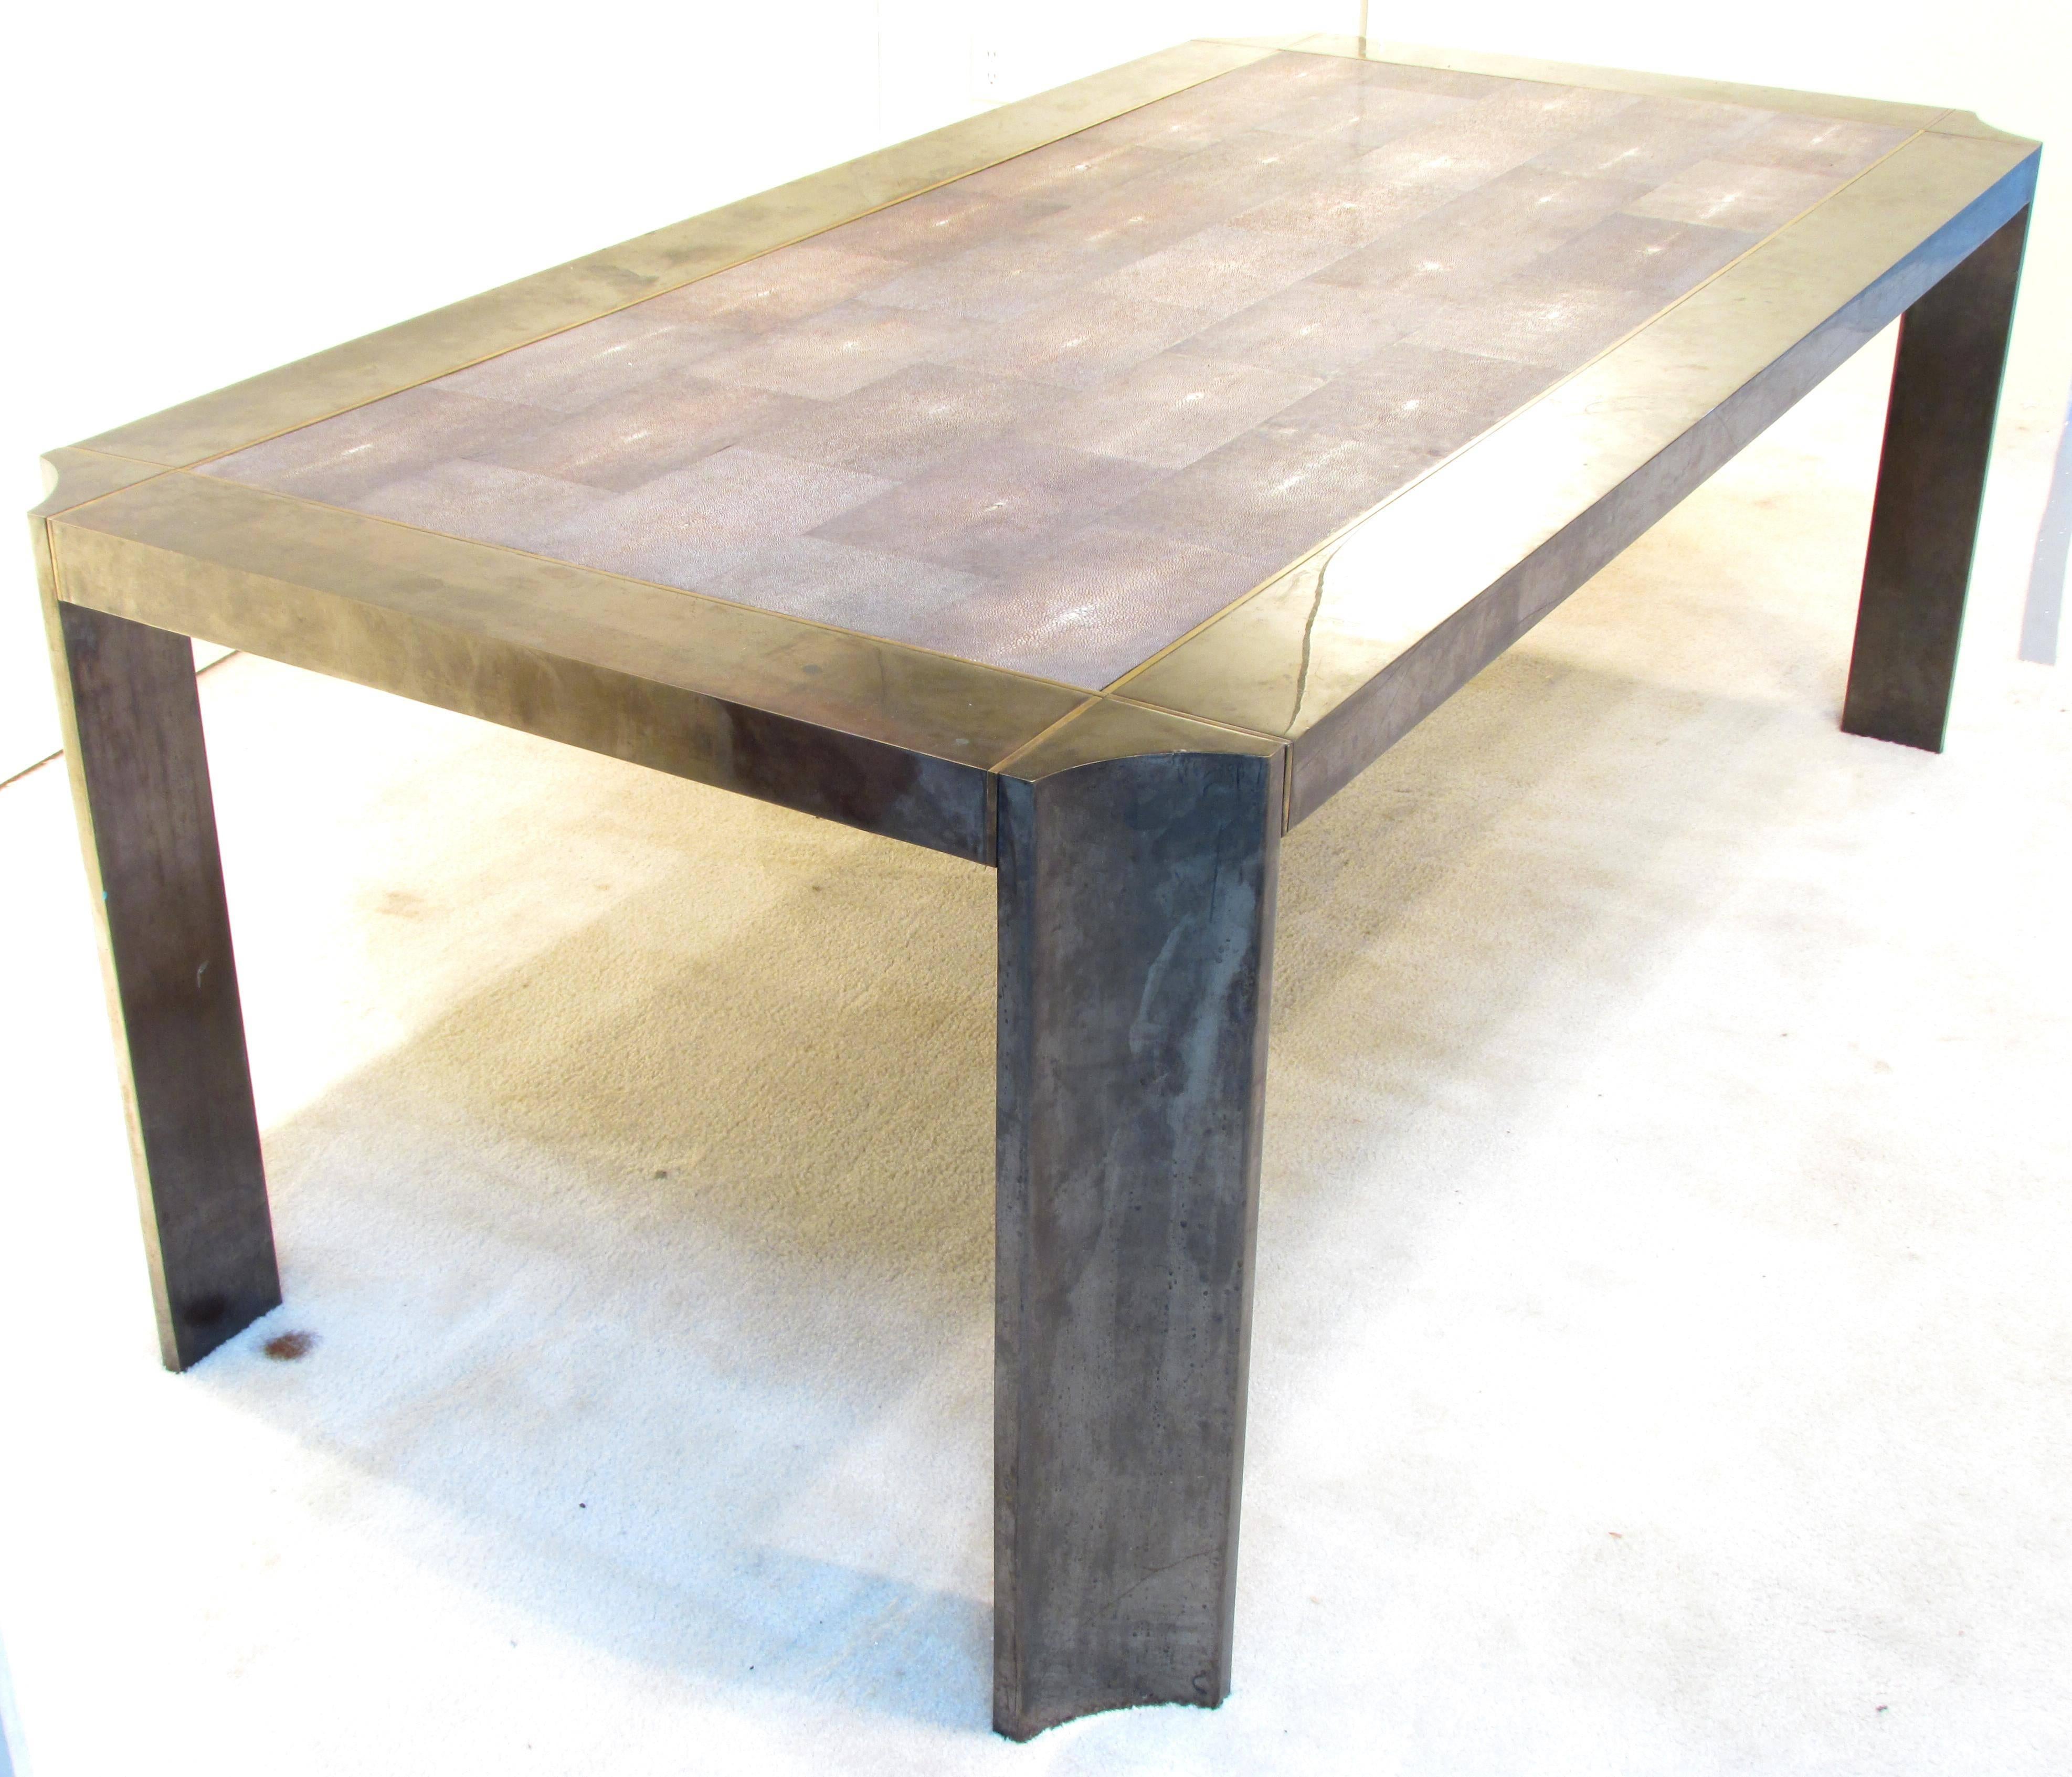 Beautiful dining table with polished gunmetal legs with bronze insets with a shagreen covered inset top by Karl Springer.